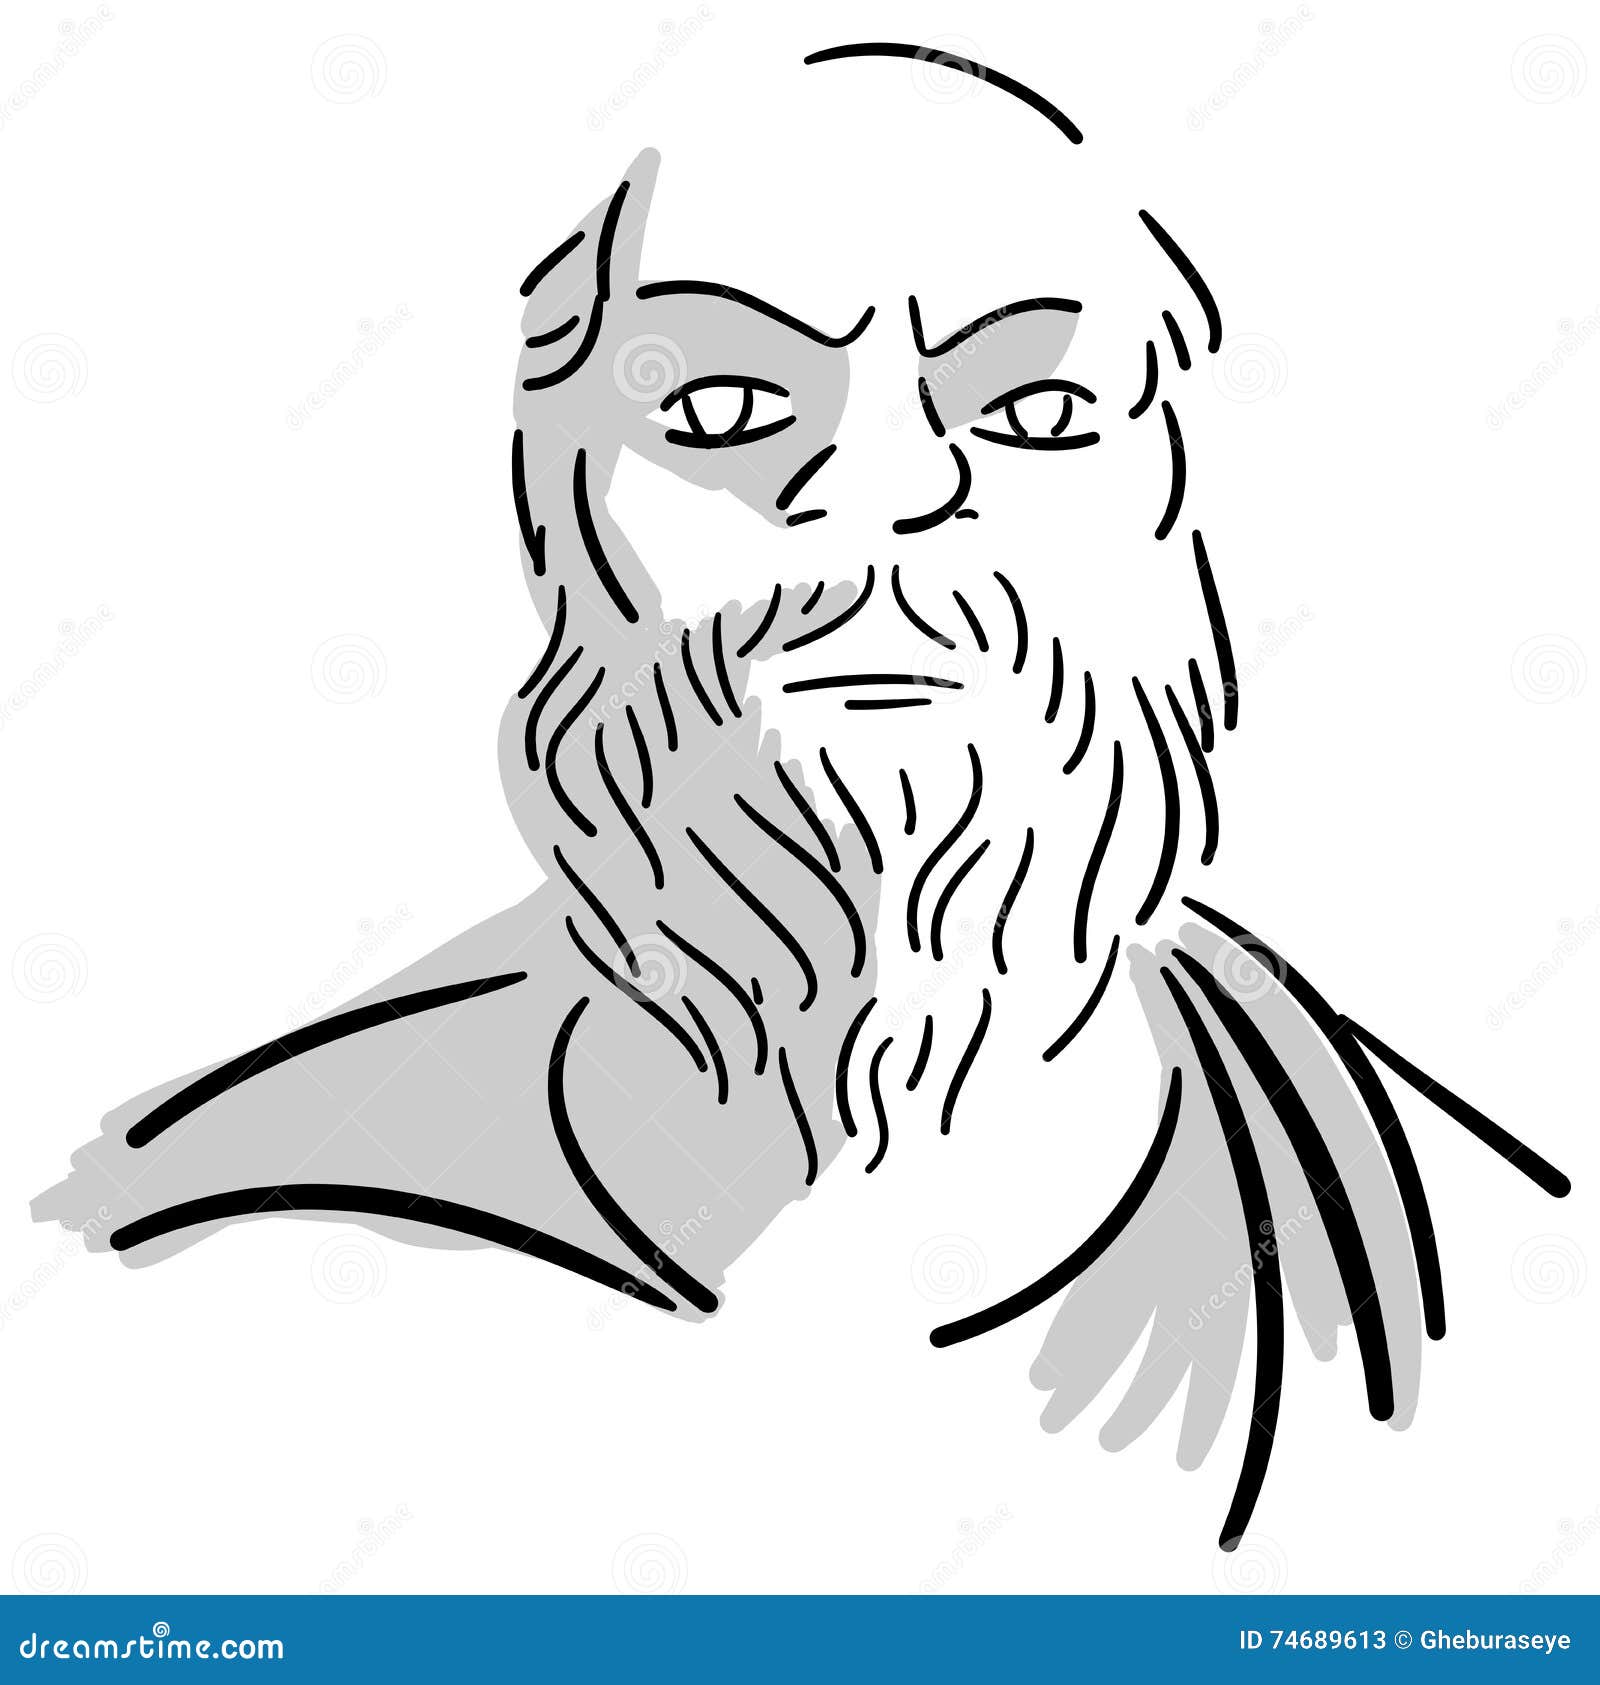 Socrates outline Sketch | Socrates drawing video | How to draw Socrates  step by step | Portrait art - YouTube